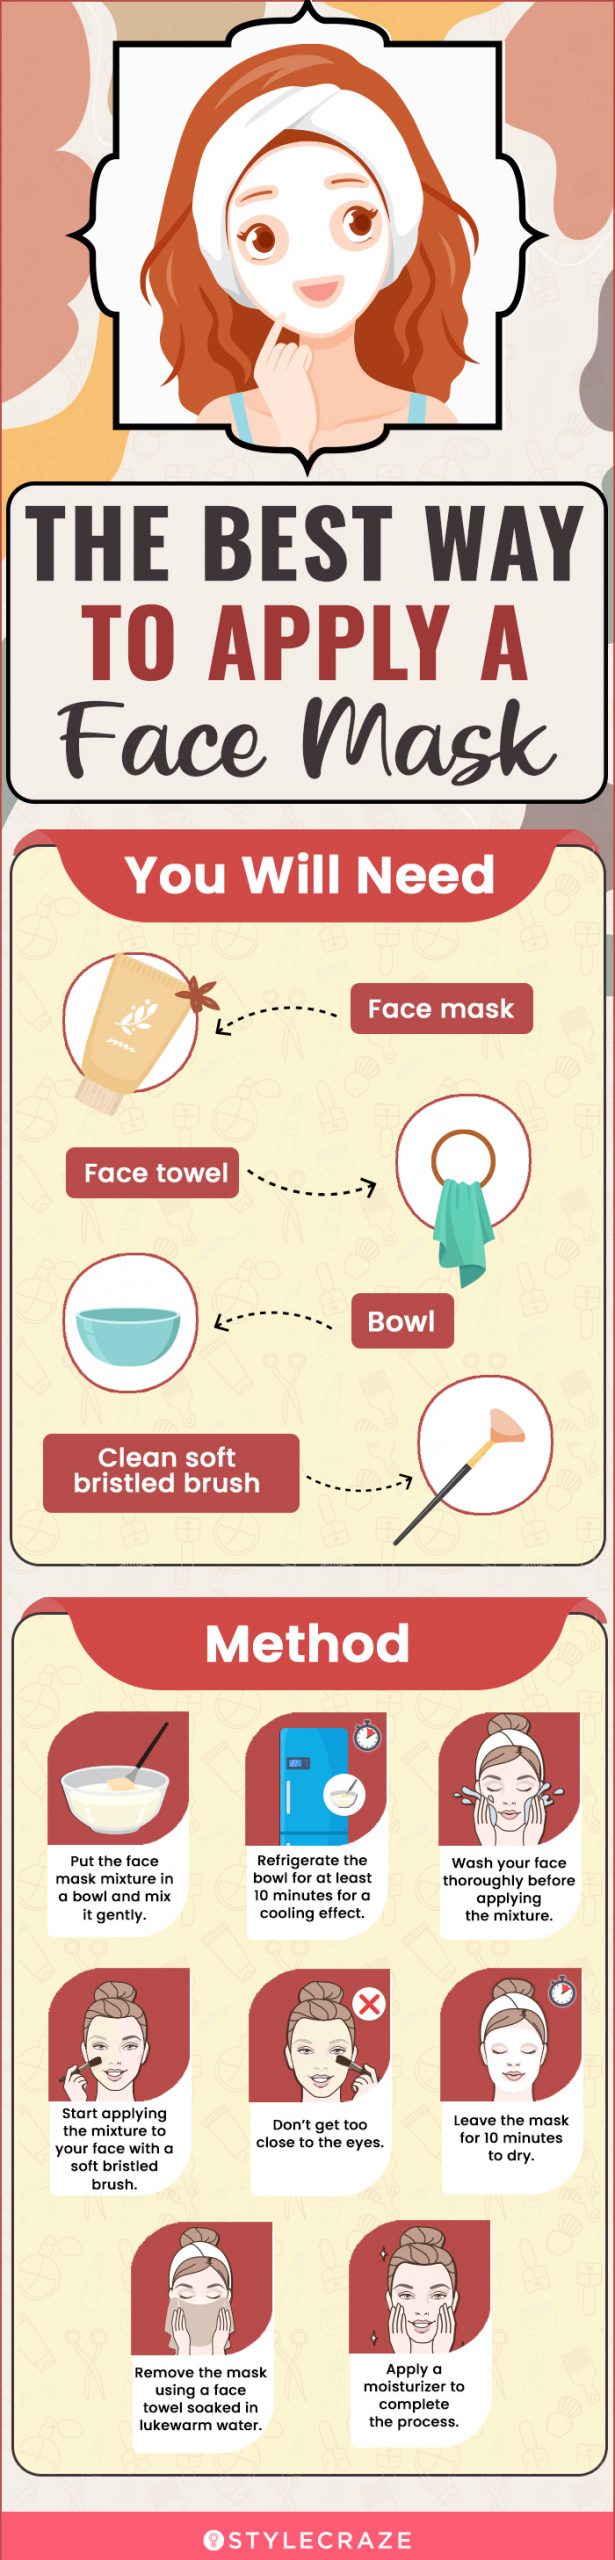 The Best Way To Apply A Face Mask [infographic]